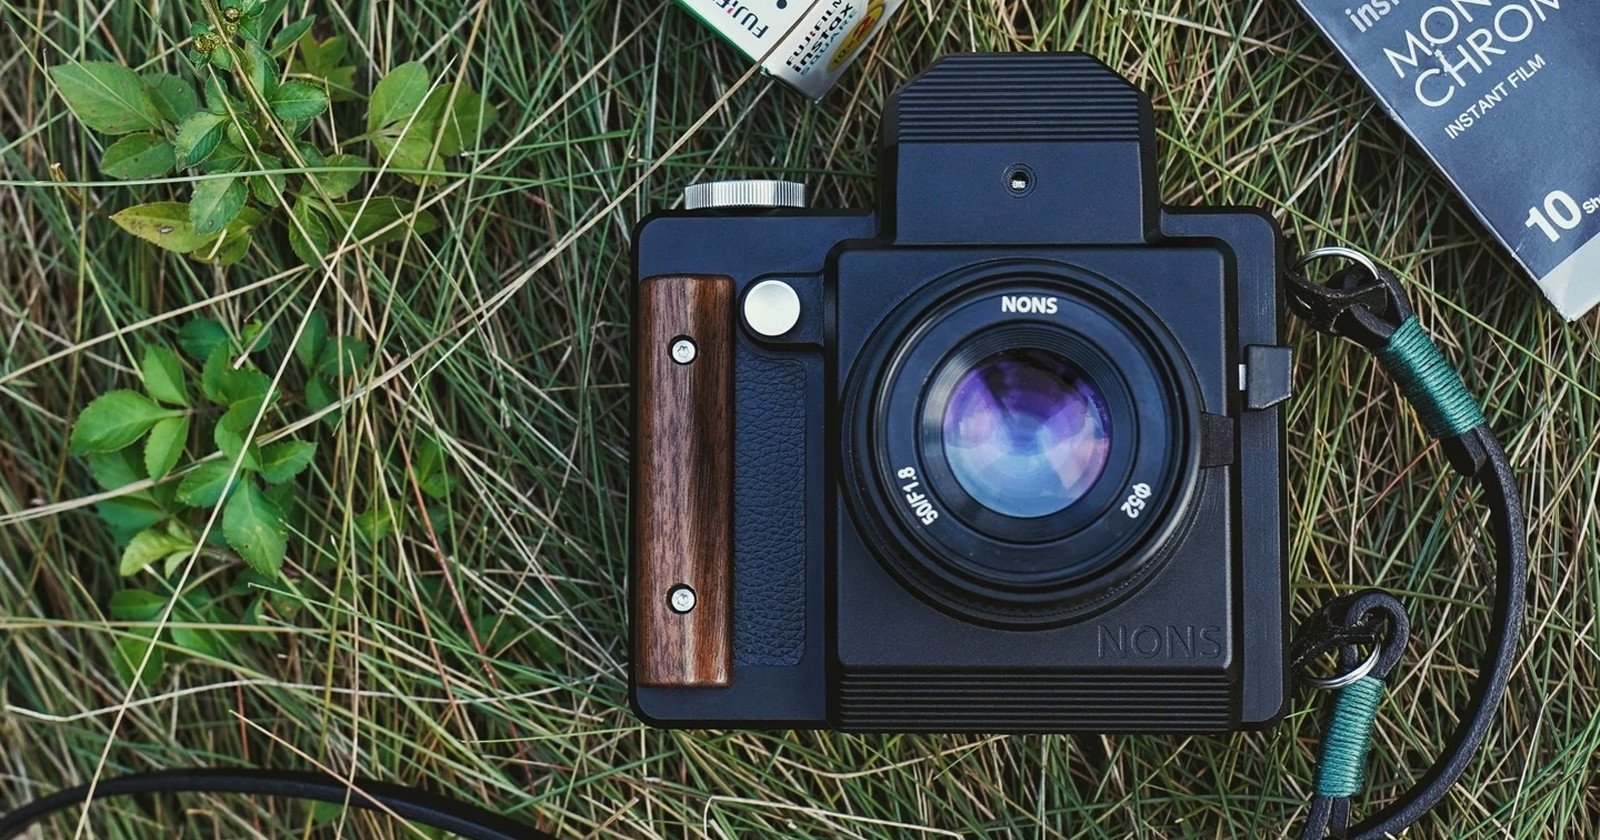 The NONS SL660 Camera Uses EF Lenses and Shoots to Instax Film